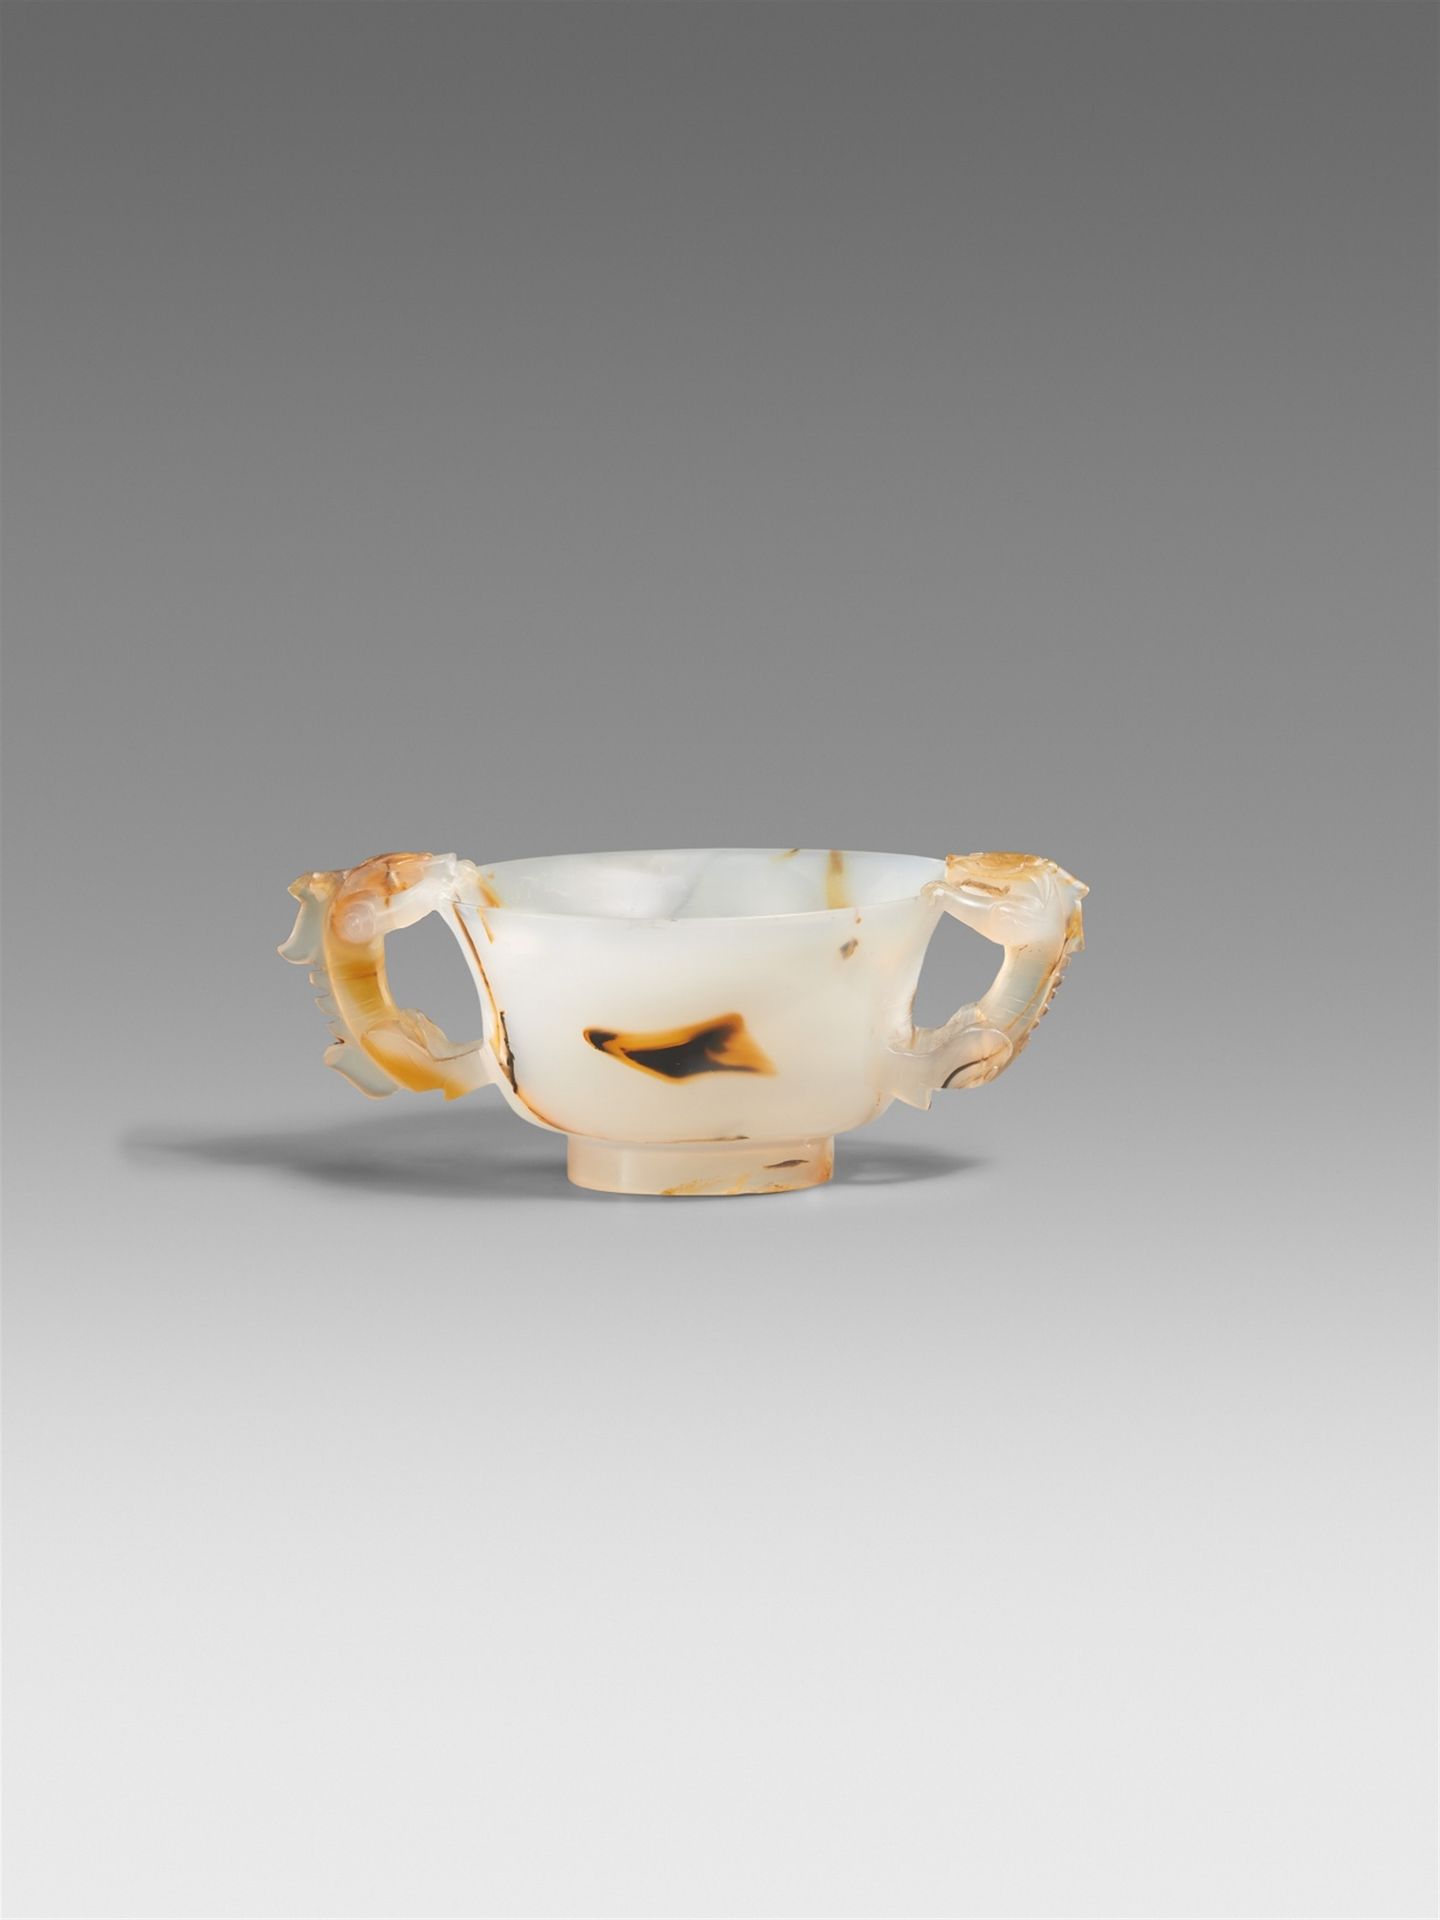 Null A fine carved agate chilong cup. 17th century



The cup is carved with a f&hellip;